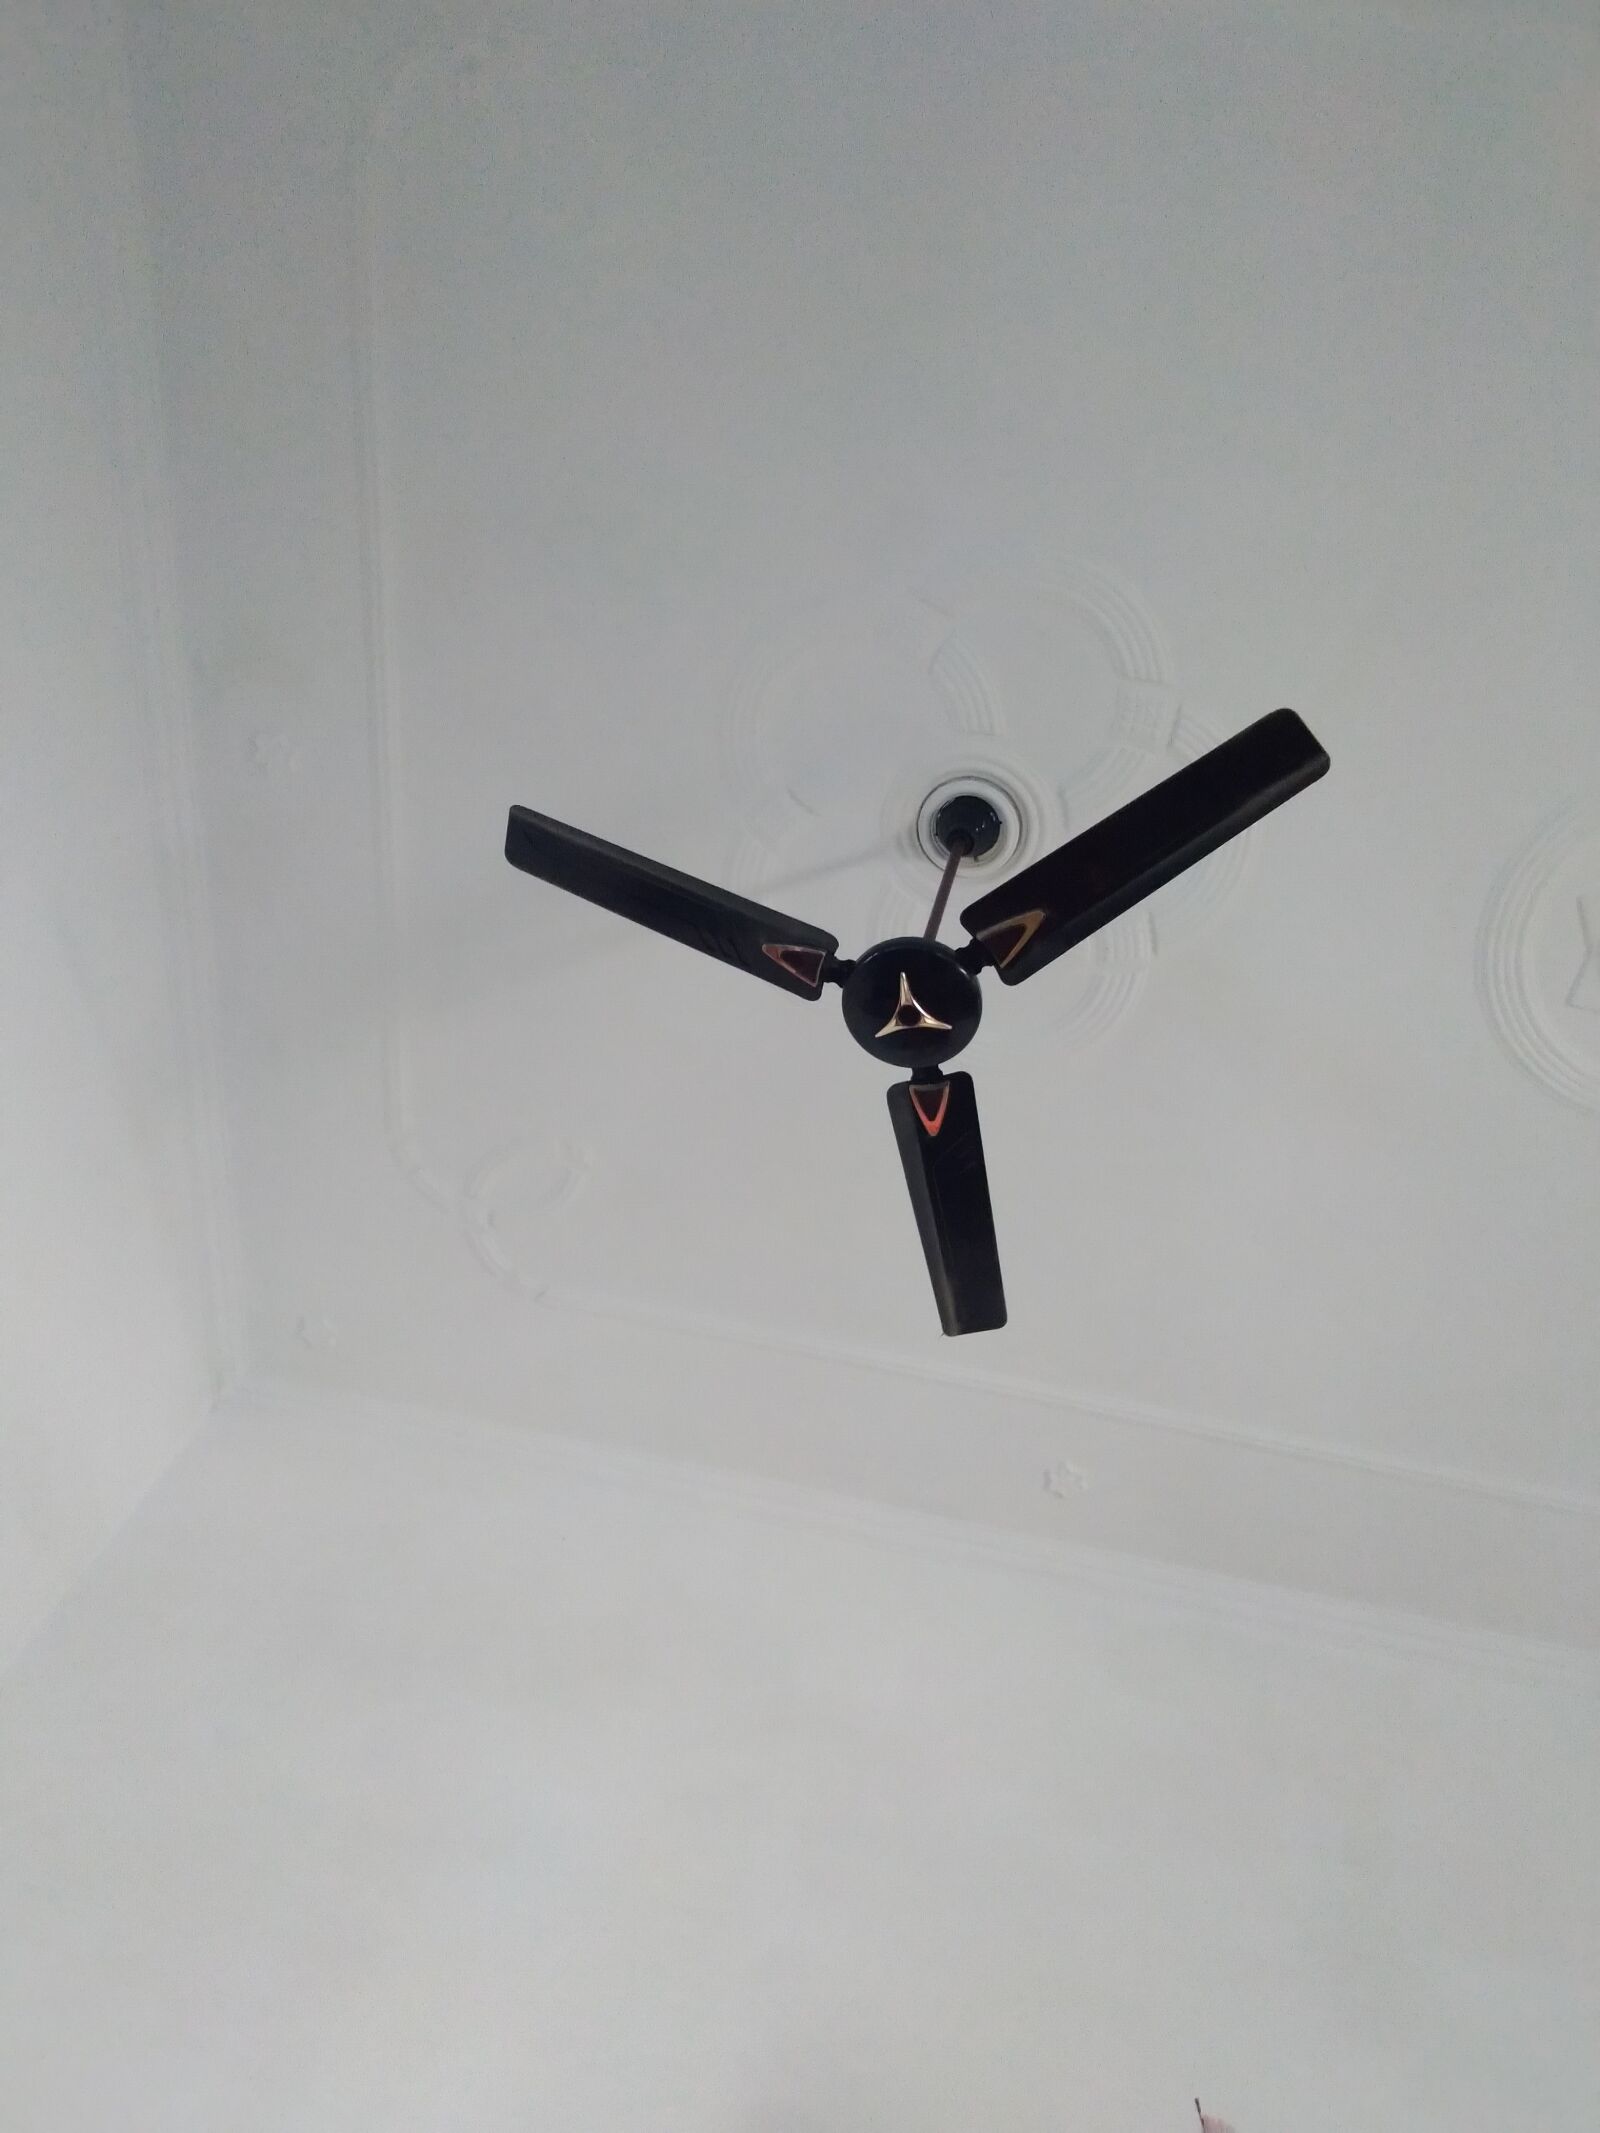 ASUS ZenFone Max Pro M1 (ZB602KL) (WW) / Max Pro M1 (ZB601KL) (IN) sample photo. Ceiling fan, fan, chat photography